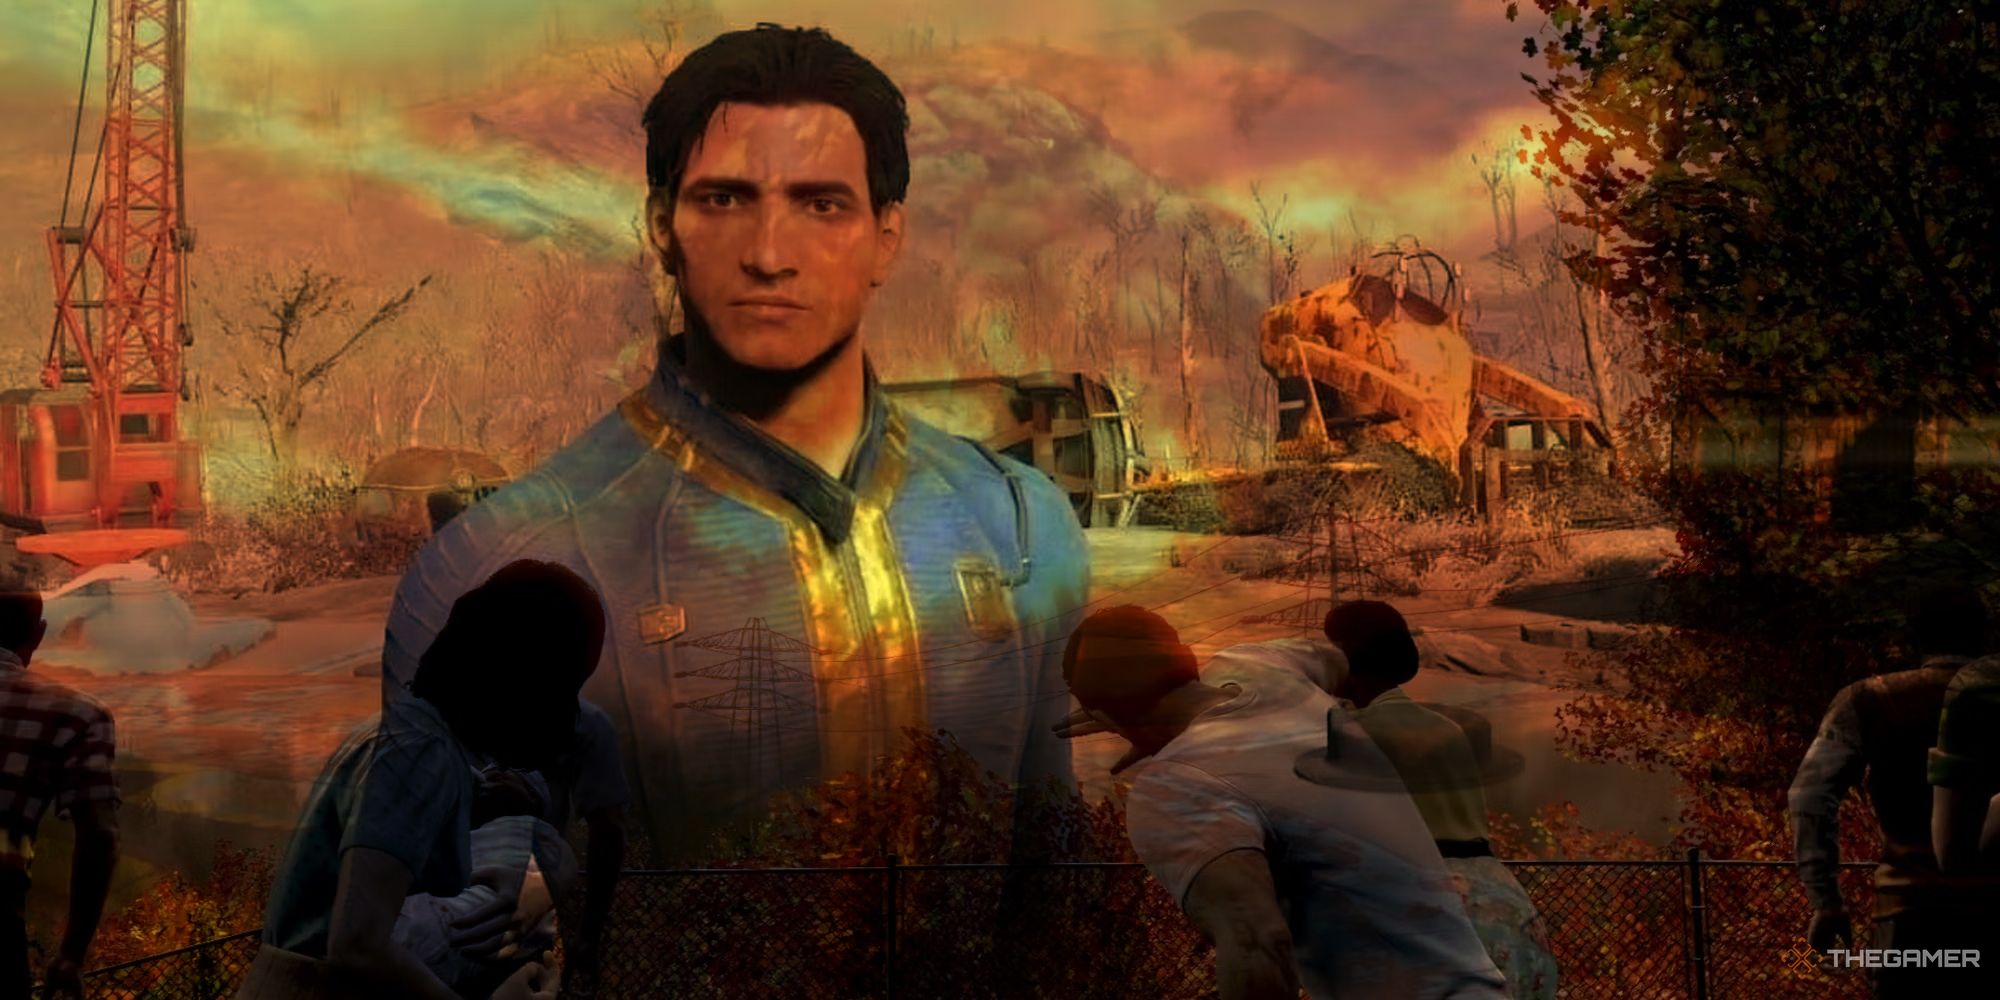 Fallout 4 Nate with the nuke scene superimposed over the top